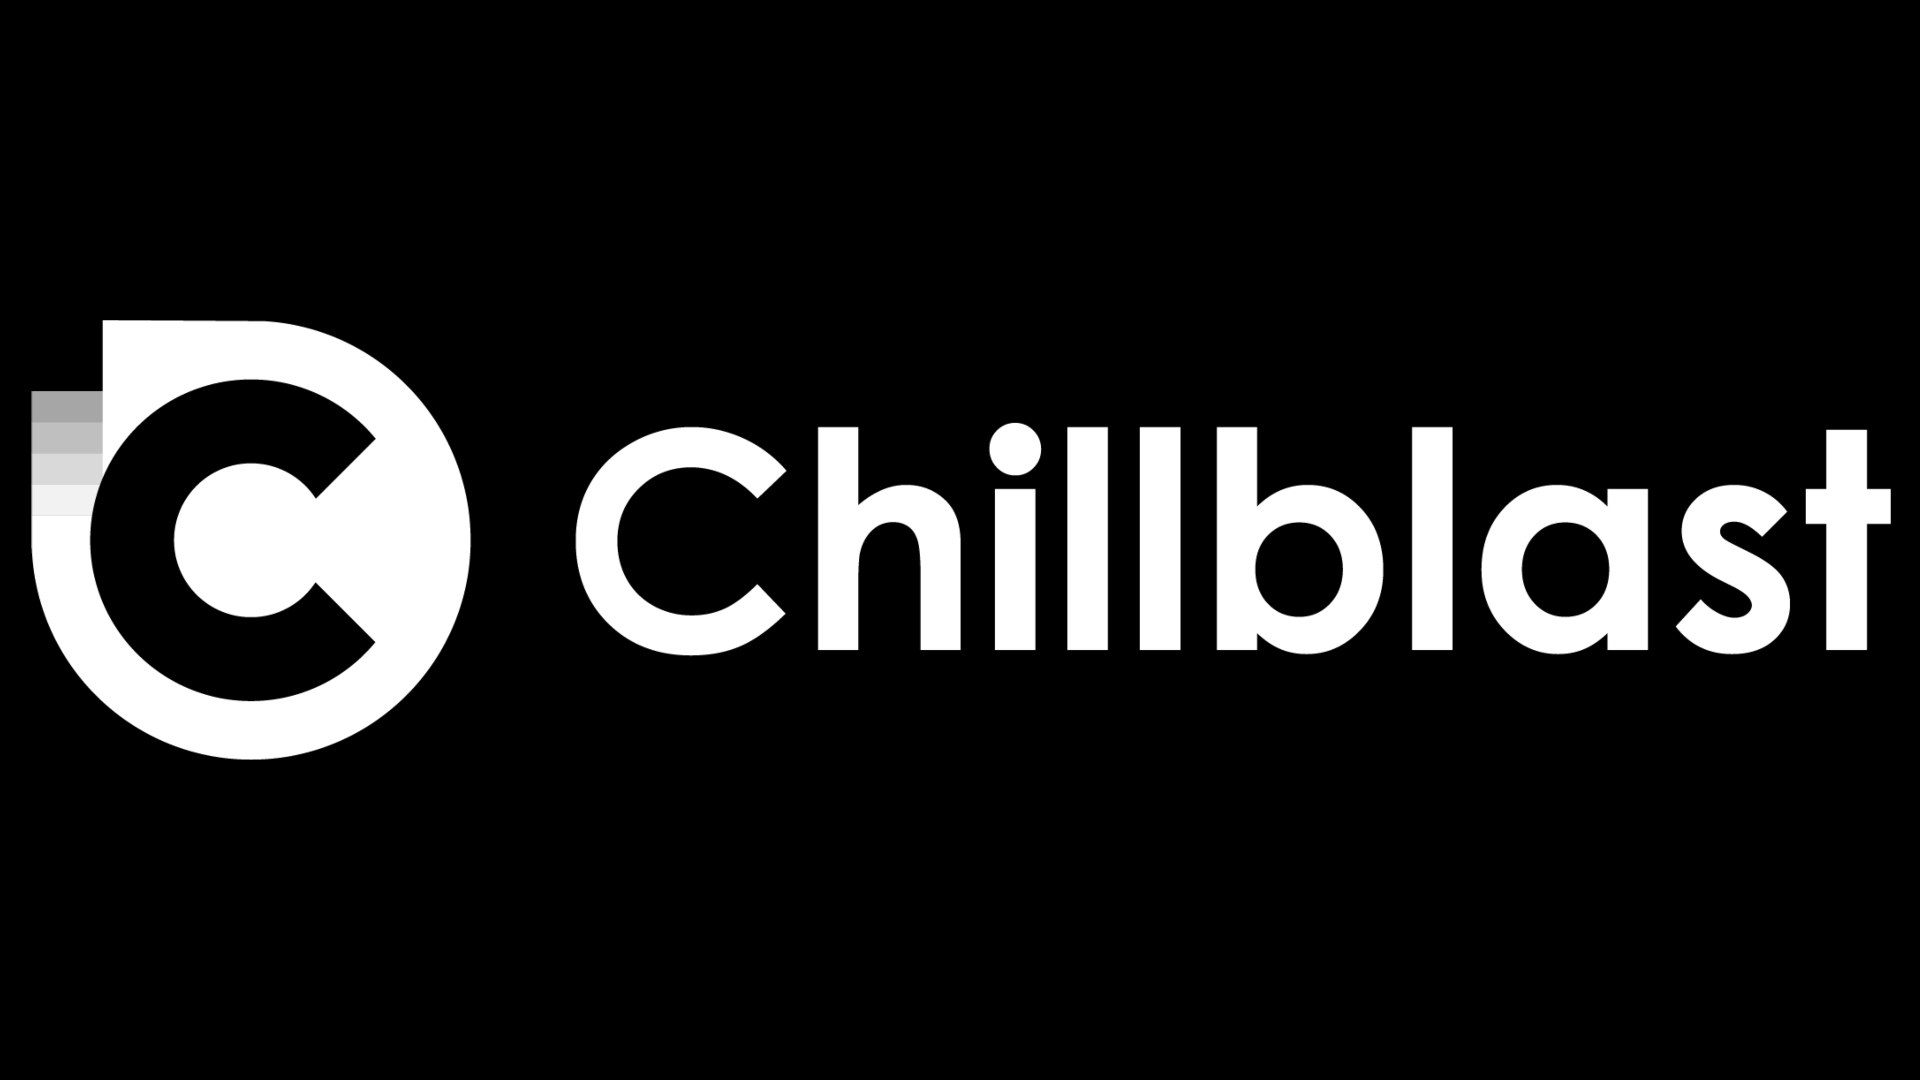 Best websites for custom PC builds, number 5: Chillblast. Its white logo is on a black background.